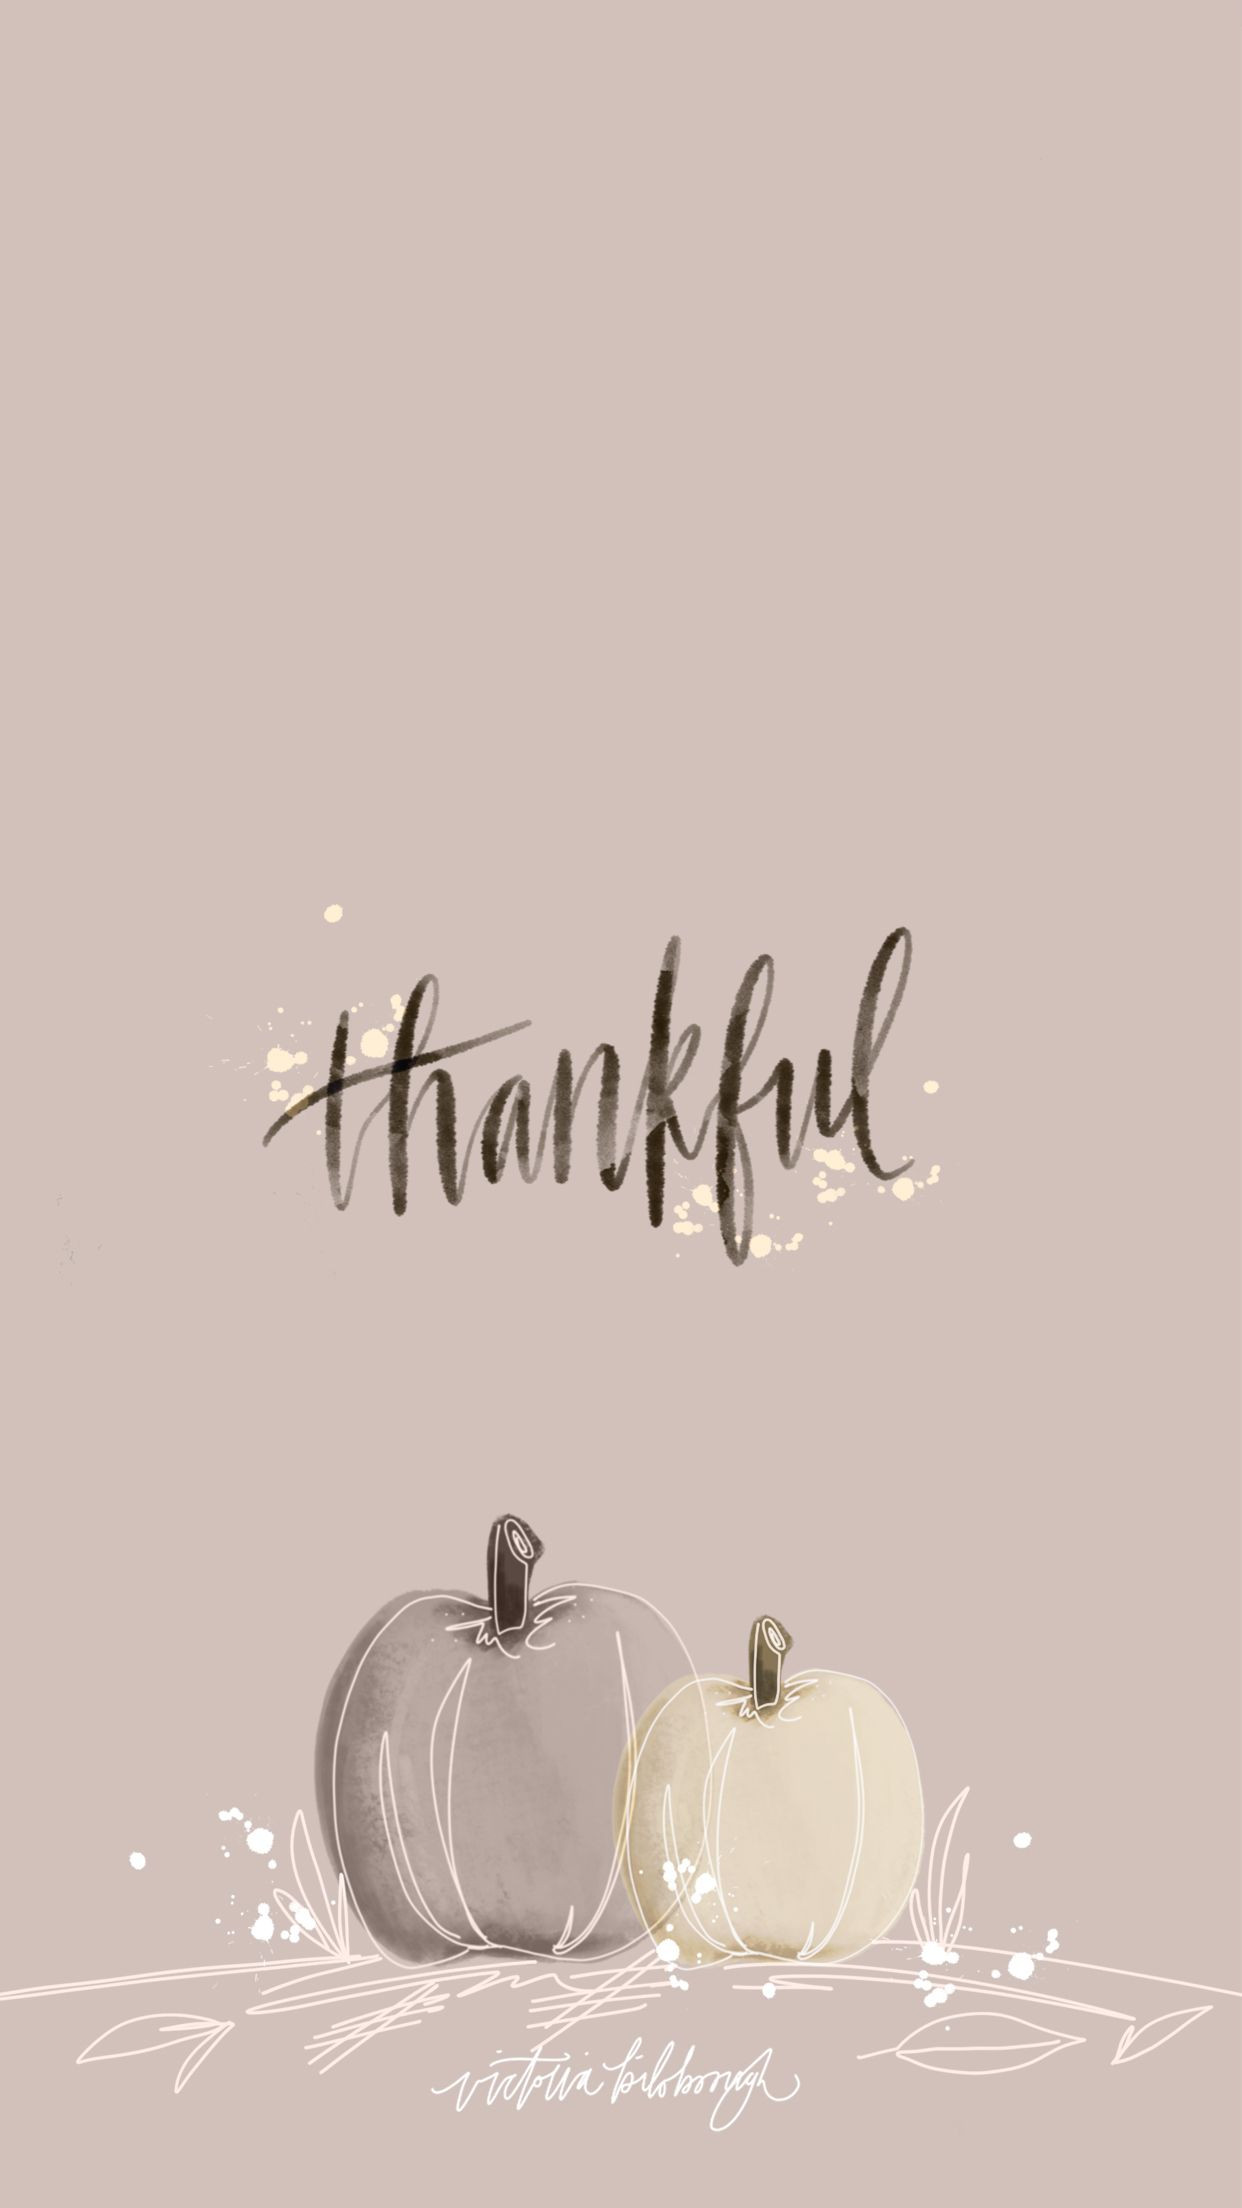 Thanksgiving Quotes Pink
 November Thanksgiving Wallpapers